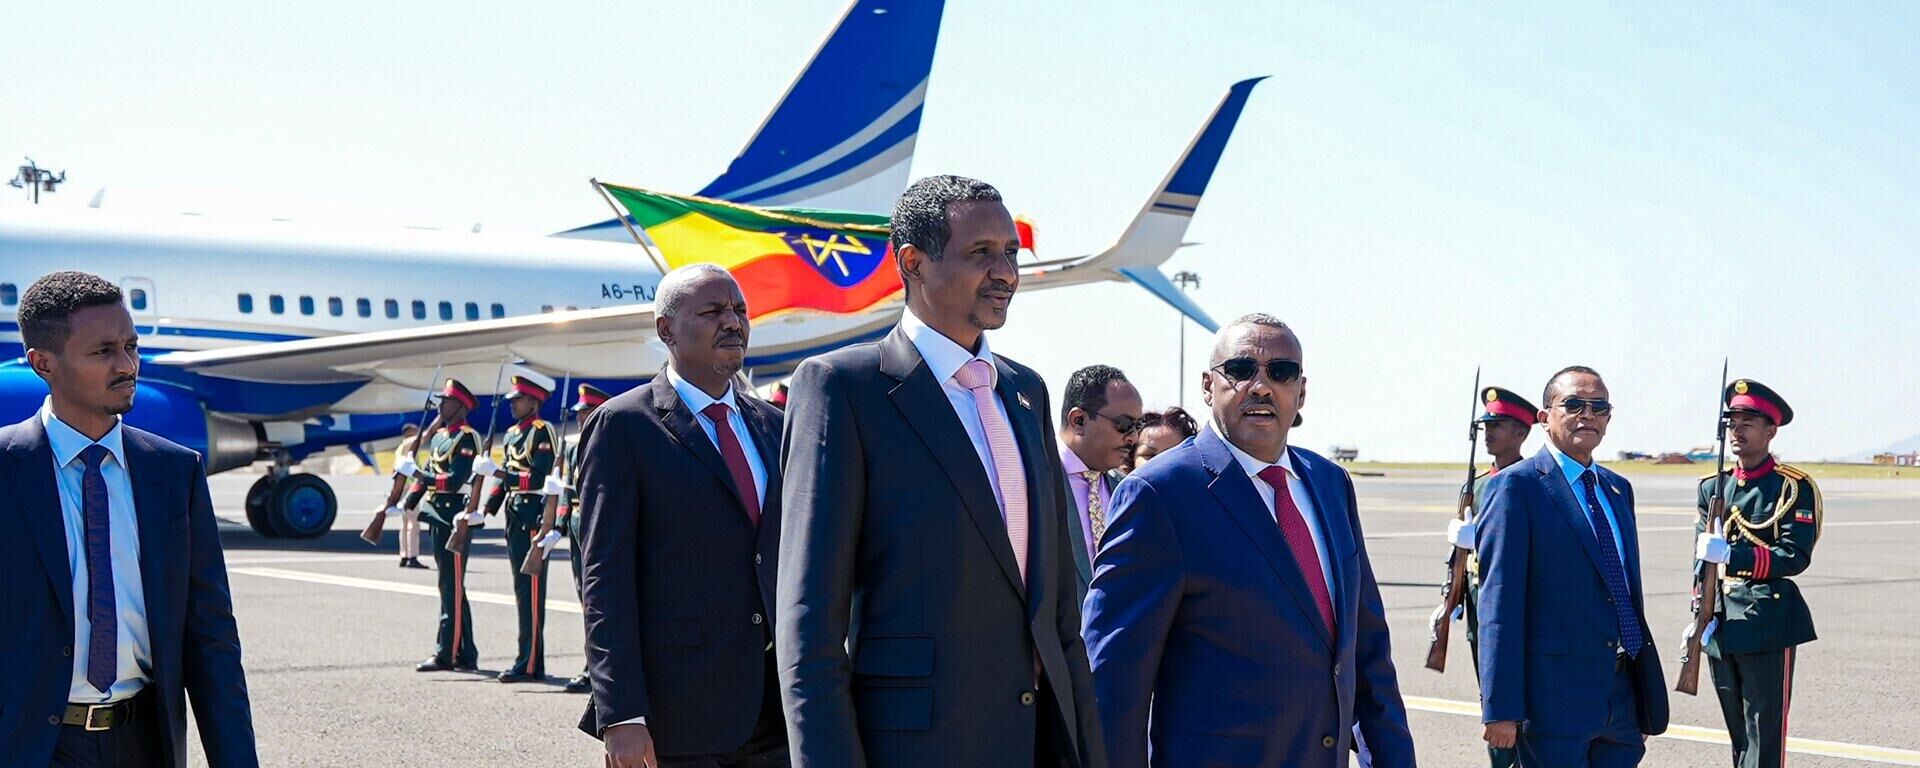 Ethiopia's Deputy Prime Minister and Minister of Foreign Affairs, Demeke Mekonnen, welcomes the leader of Sudan's paramilitary Rapid Support Forces, Gen. Mohamed Hamdan Dagalo, at Bole International Airport in Addis Ababa, Ethiopia, on Thursday, December 28, 2023, during the general's second confirmed appearance outside Sudan since the conflict between the paramilitary forces and the Sudanese army began in mid-April. - Sputnik Africa, 1920, 28.12.2023